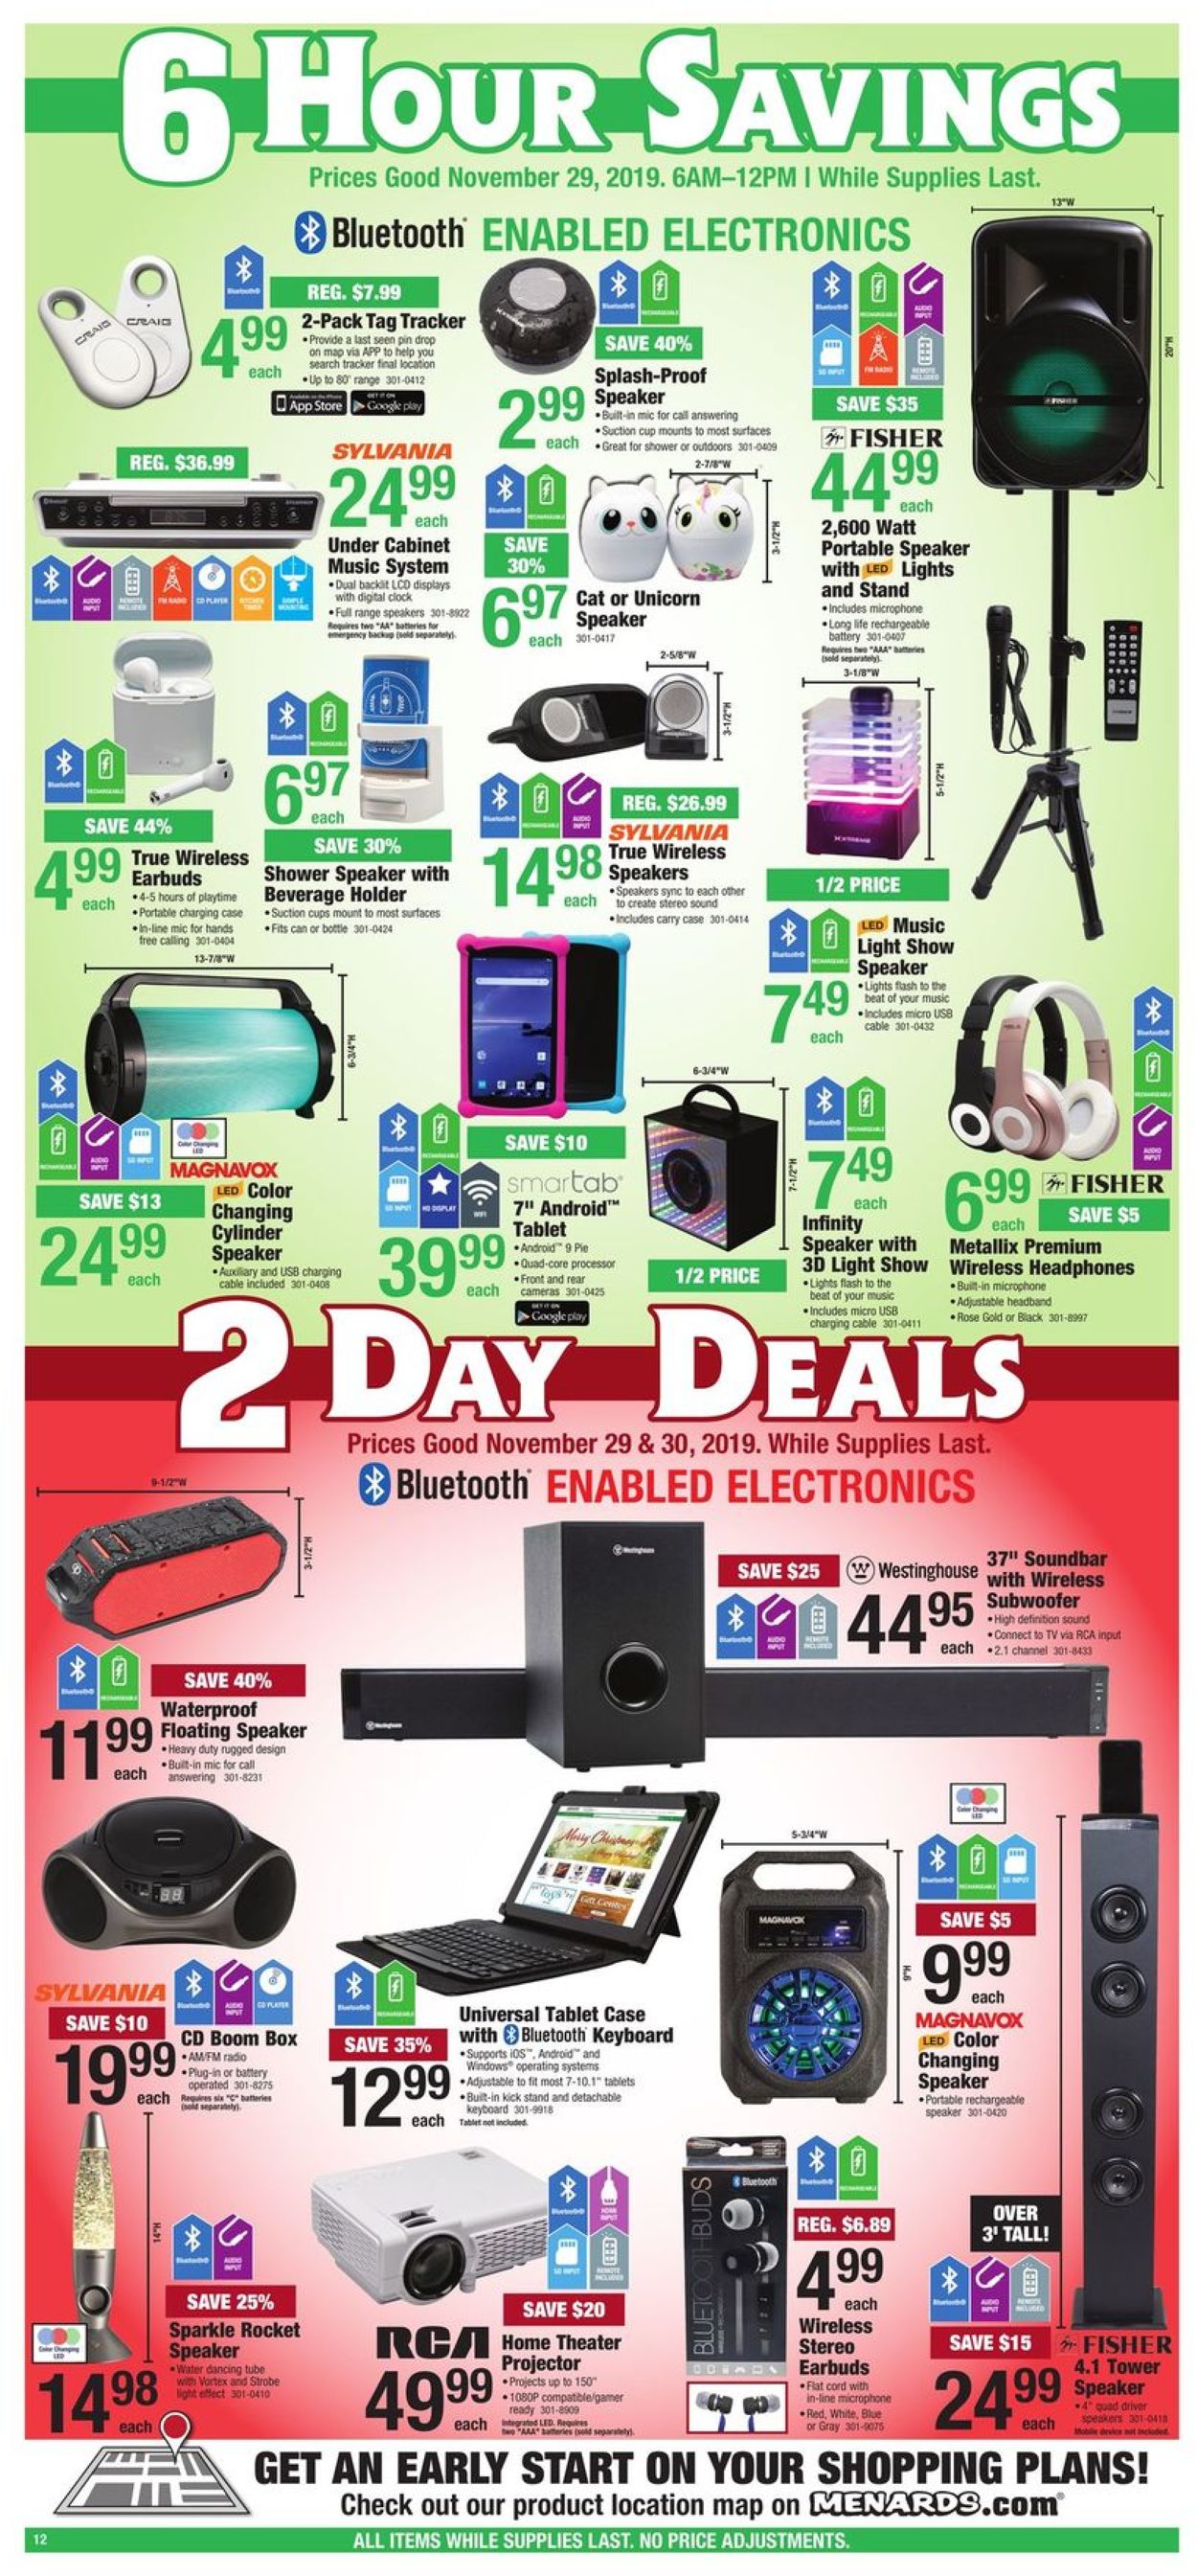 Menards - Black Friday Sale 2019 Current weekly ad 11/29 - 11/30/2019 [13] - www.bagssaleusa.com/product-category/scarves/